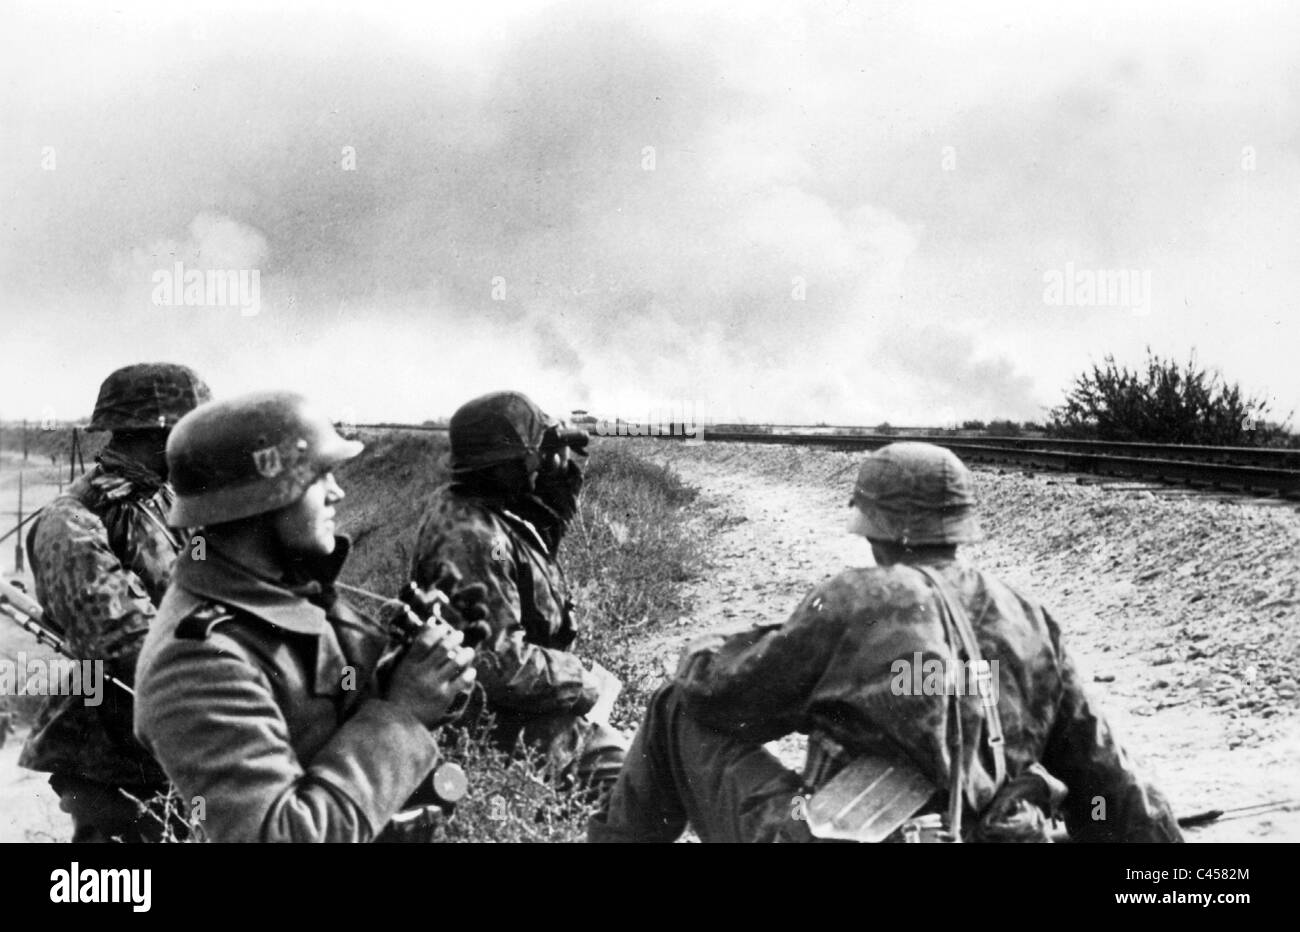 Reconnaissance patrol of the Waffen-SS in Russia, 1941 Stock Photo